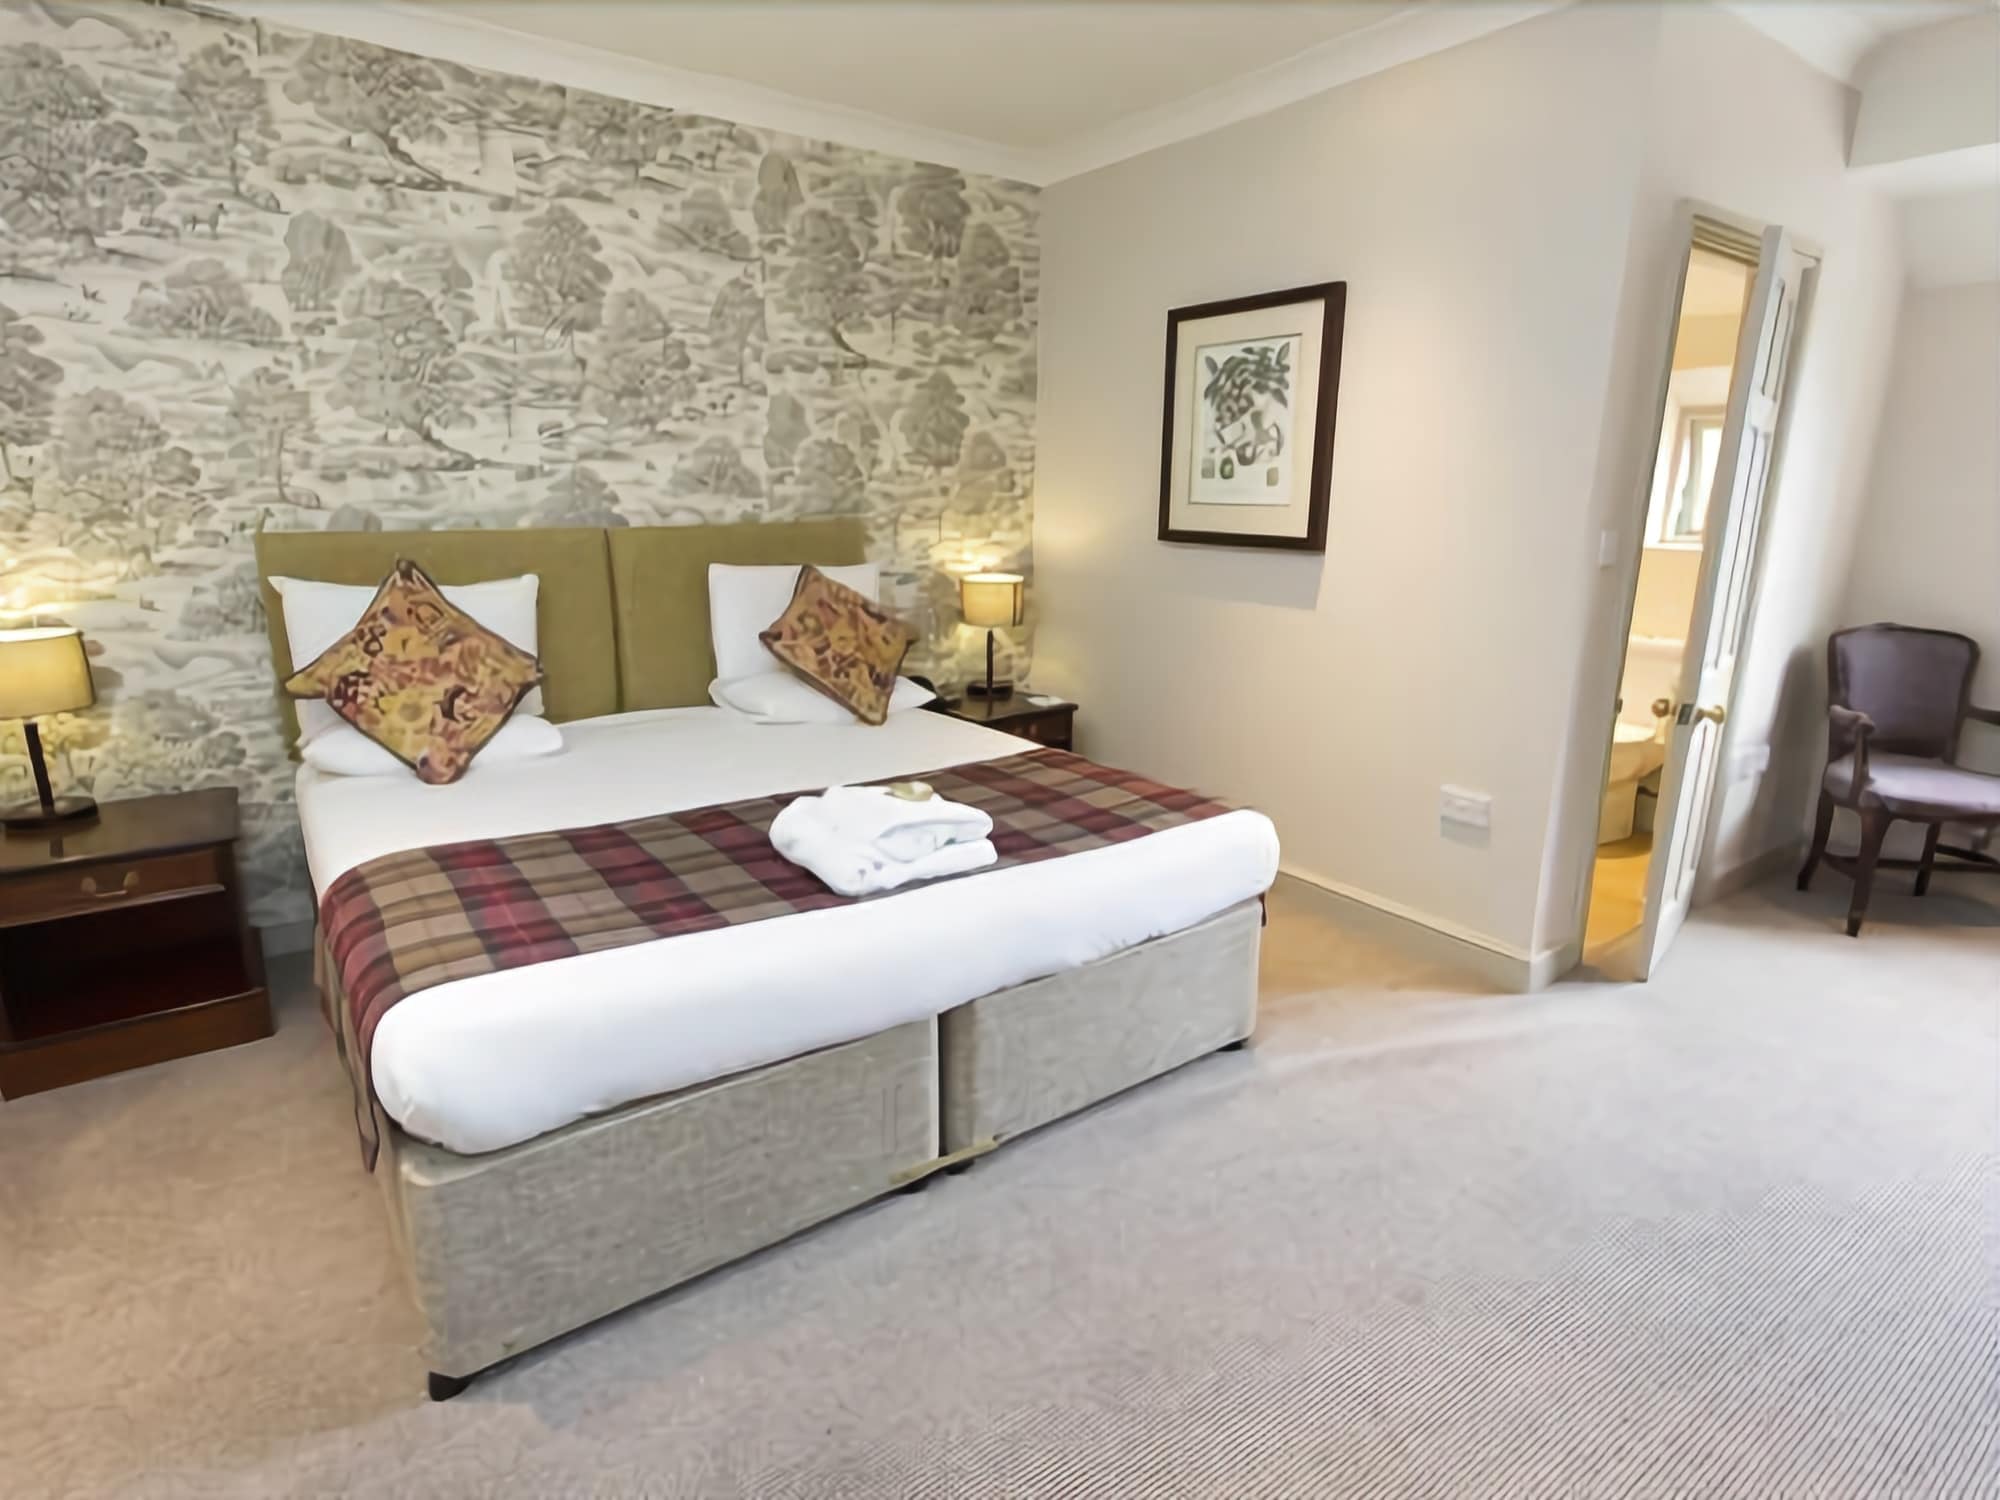 Hadley Bowling Green Inn, Droitwich Latest Price & Reviews of Global Hotels  2023 | Trip.com